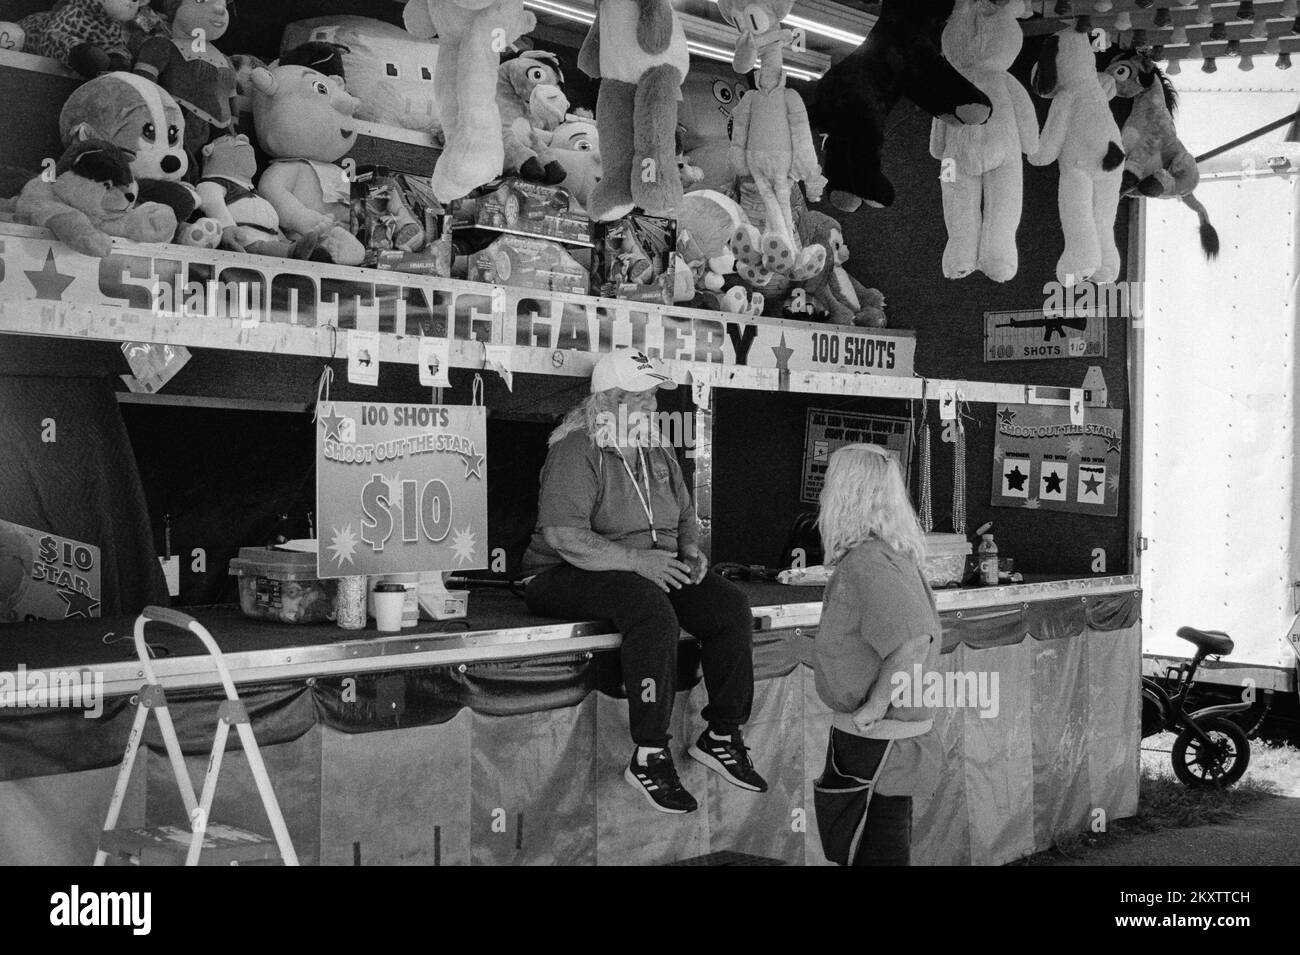 Two carnival workers chatting in a shooting gallery at the Hopkinton Fair. Hopkinton New Hampshire. The image was captured on analog black and white f Stock Photo